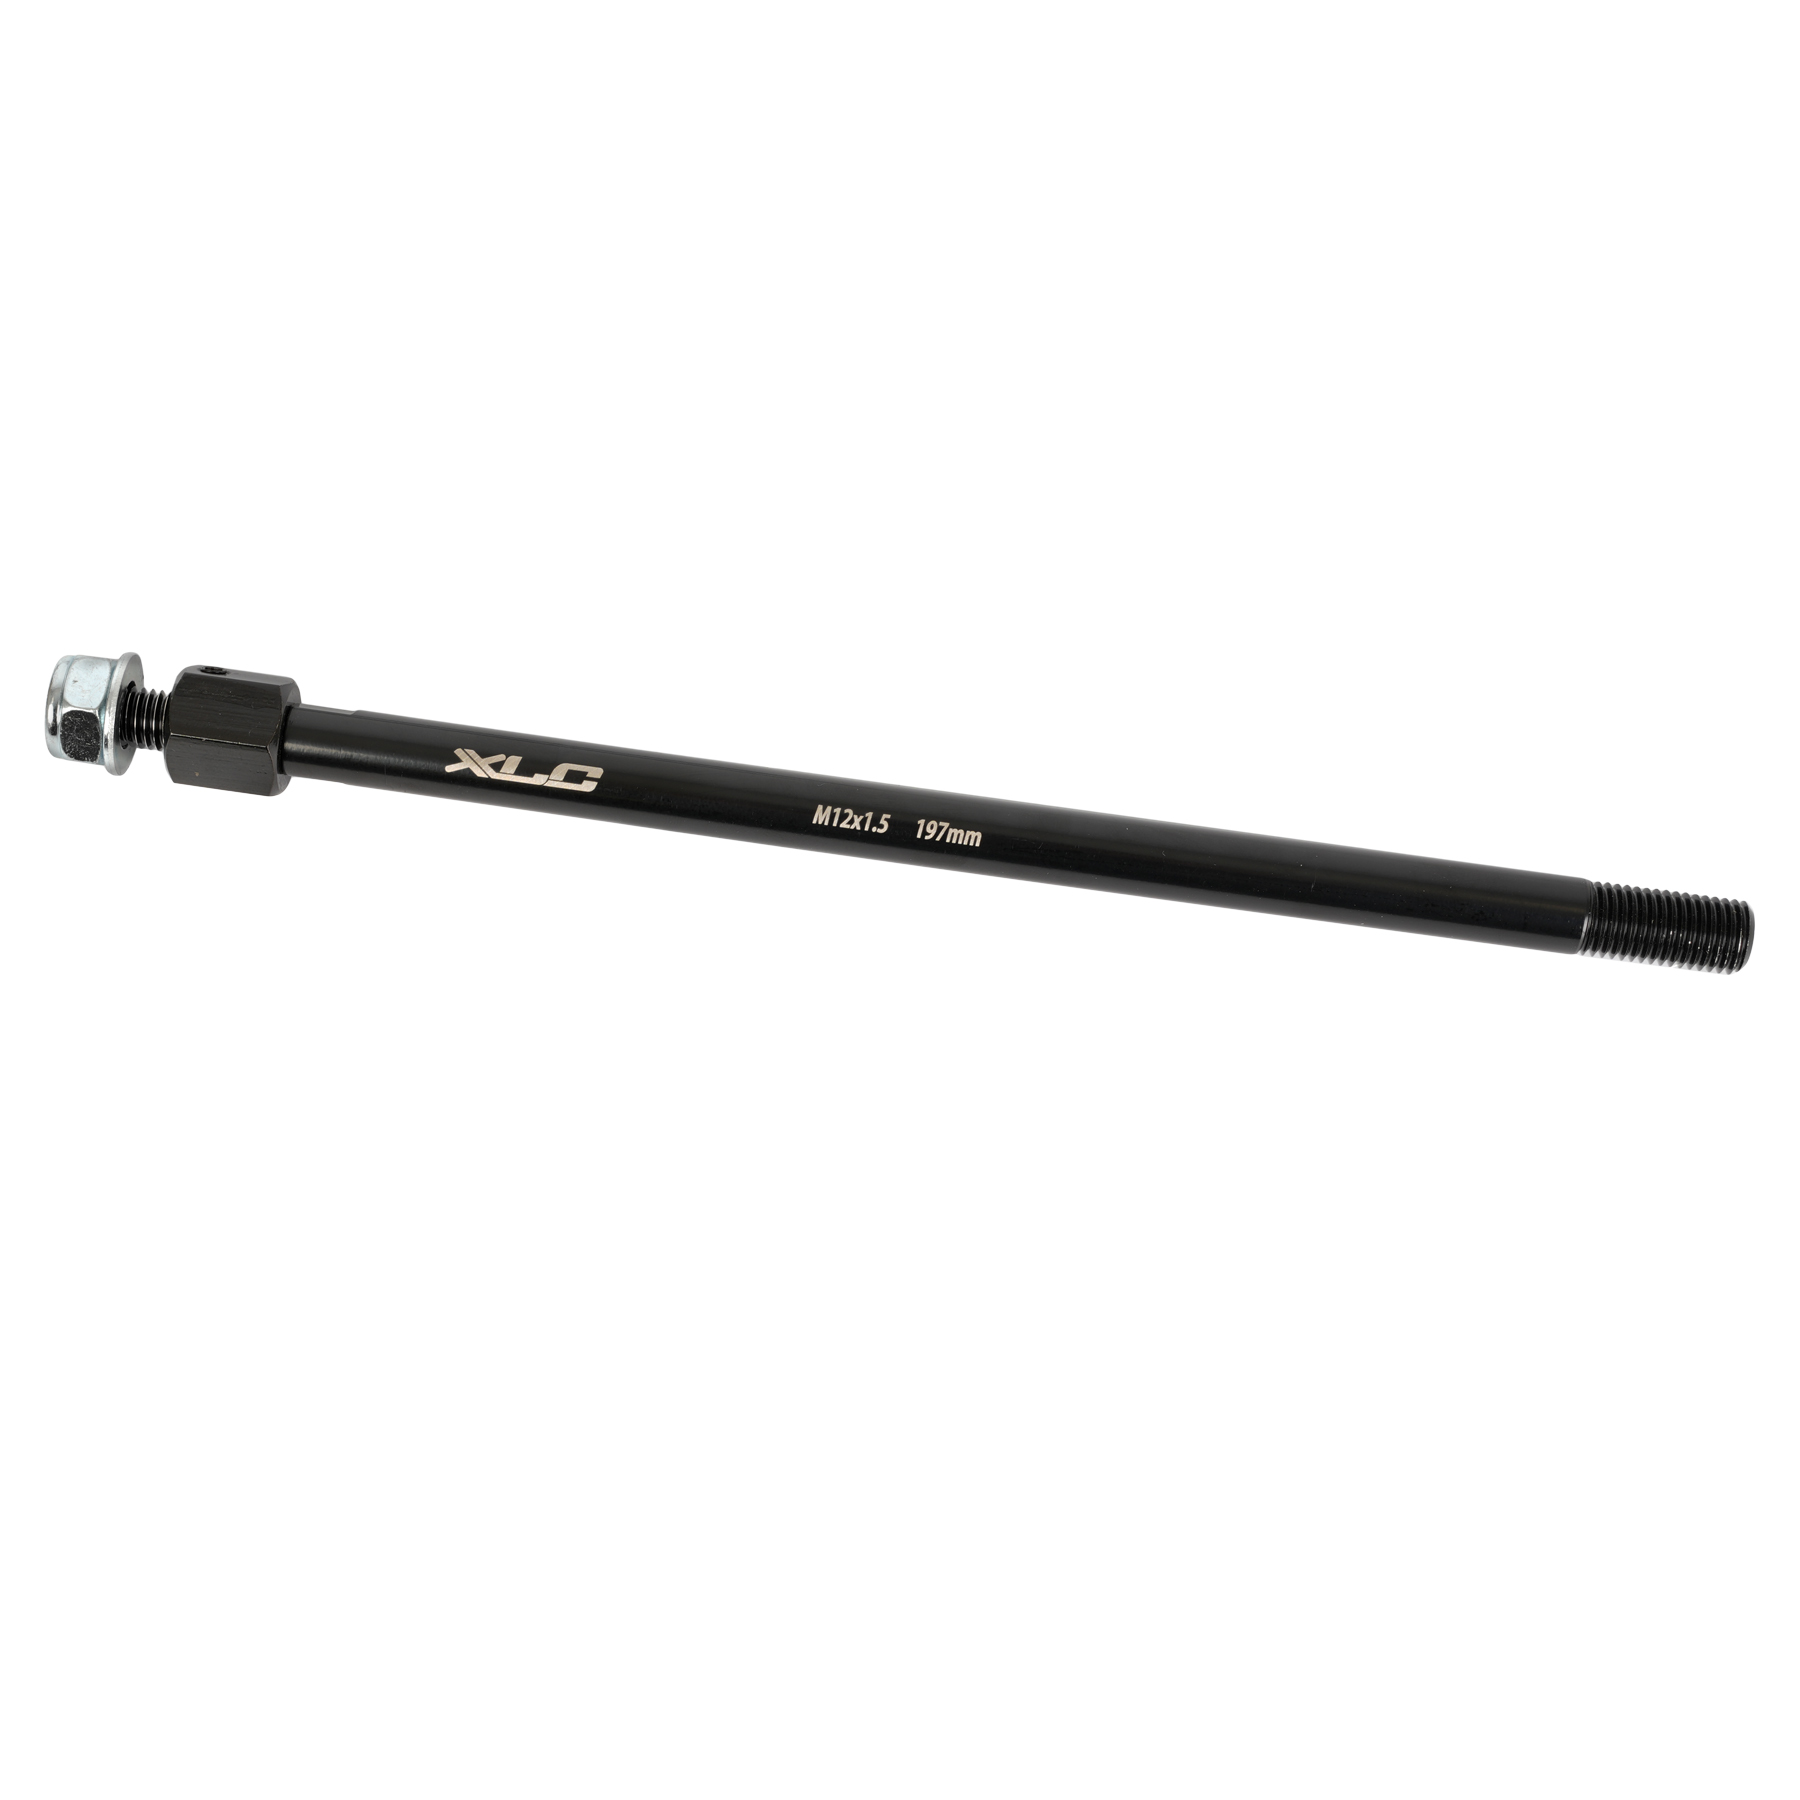 Picture of XLC Thru Axle for MONO S and DUO S - M12x1,5 - 229mm Shimano / Fatbike 197mm